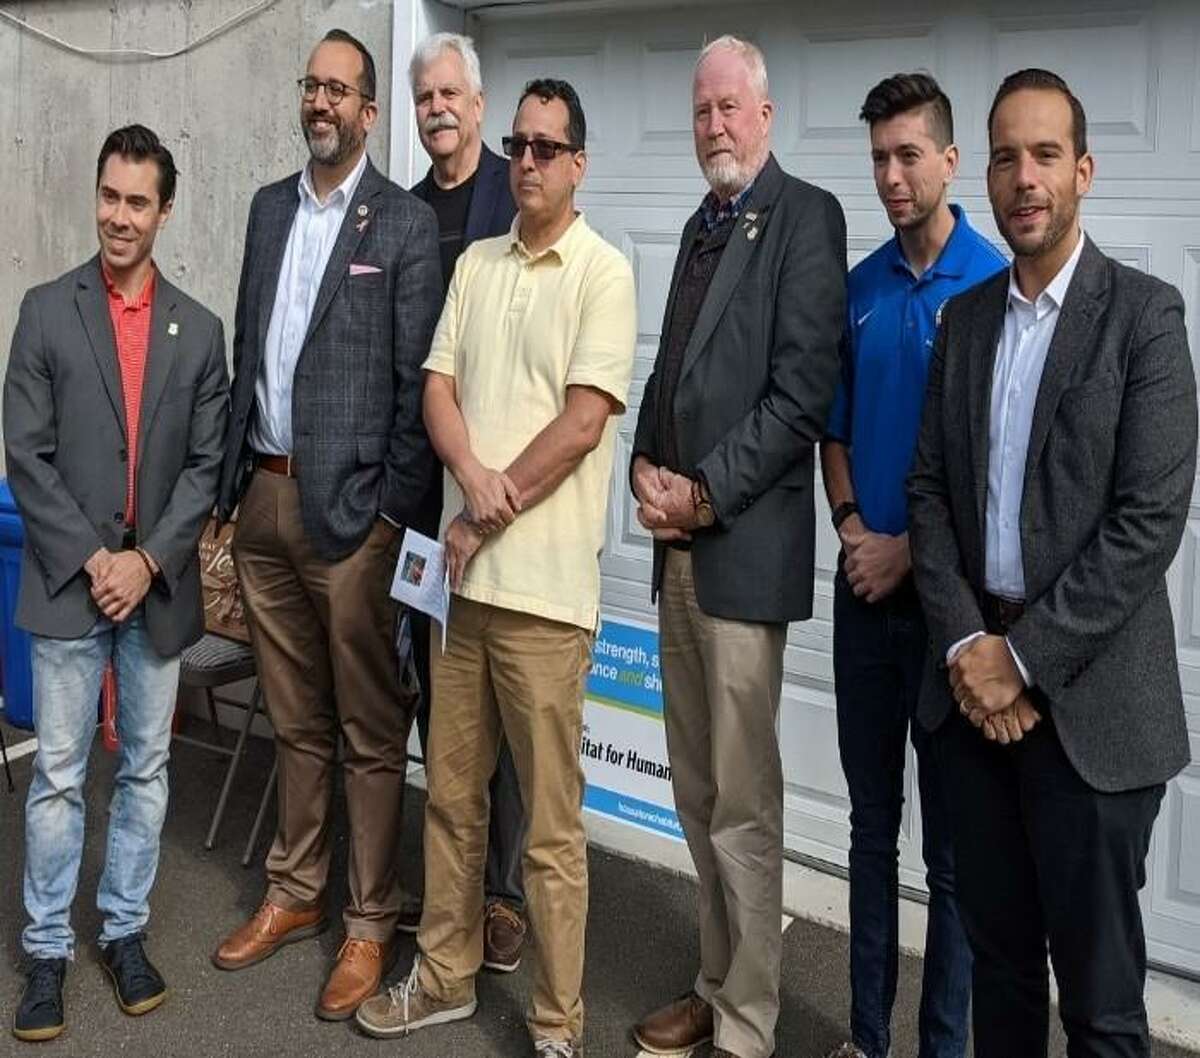 The employees and volunteers of Housatonic Habitat for Humanity dedicated a house to a new homeowner, Fernando Franco. From left to right: State Rep. David Arconti, D-Danbury, Roberto Alves, Danbury City Council member, State Rep. Bob Godfrey, D-Danbury, Franco, State Rep. Ken Gucker, D-Danbury, Joe Britton, Danbury school board member, Farley Santos, Danbury City Council member.